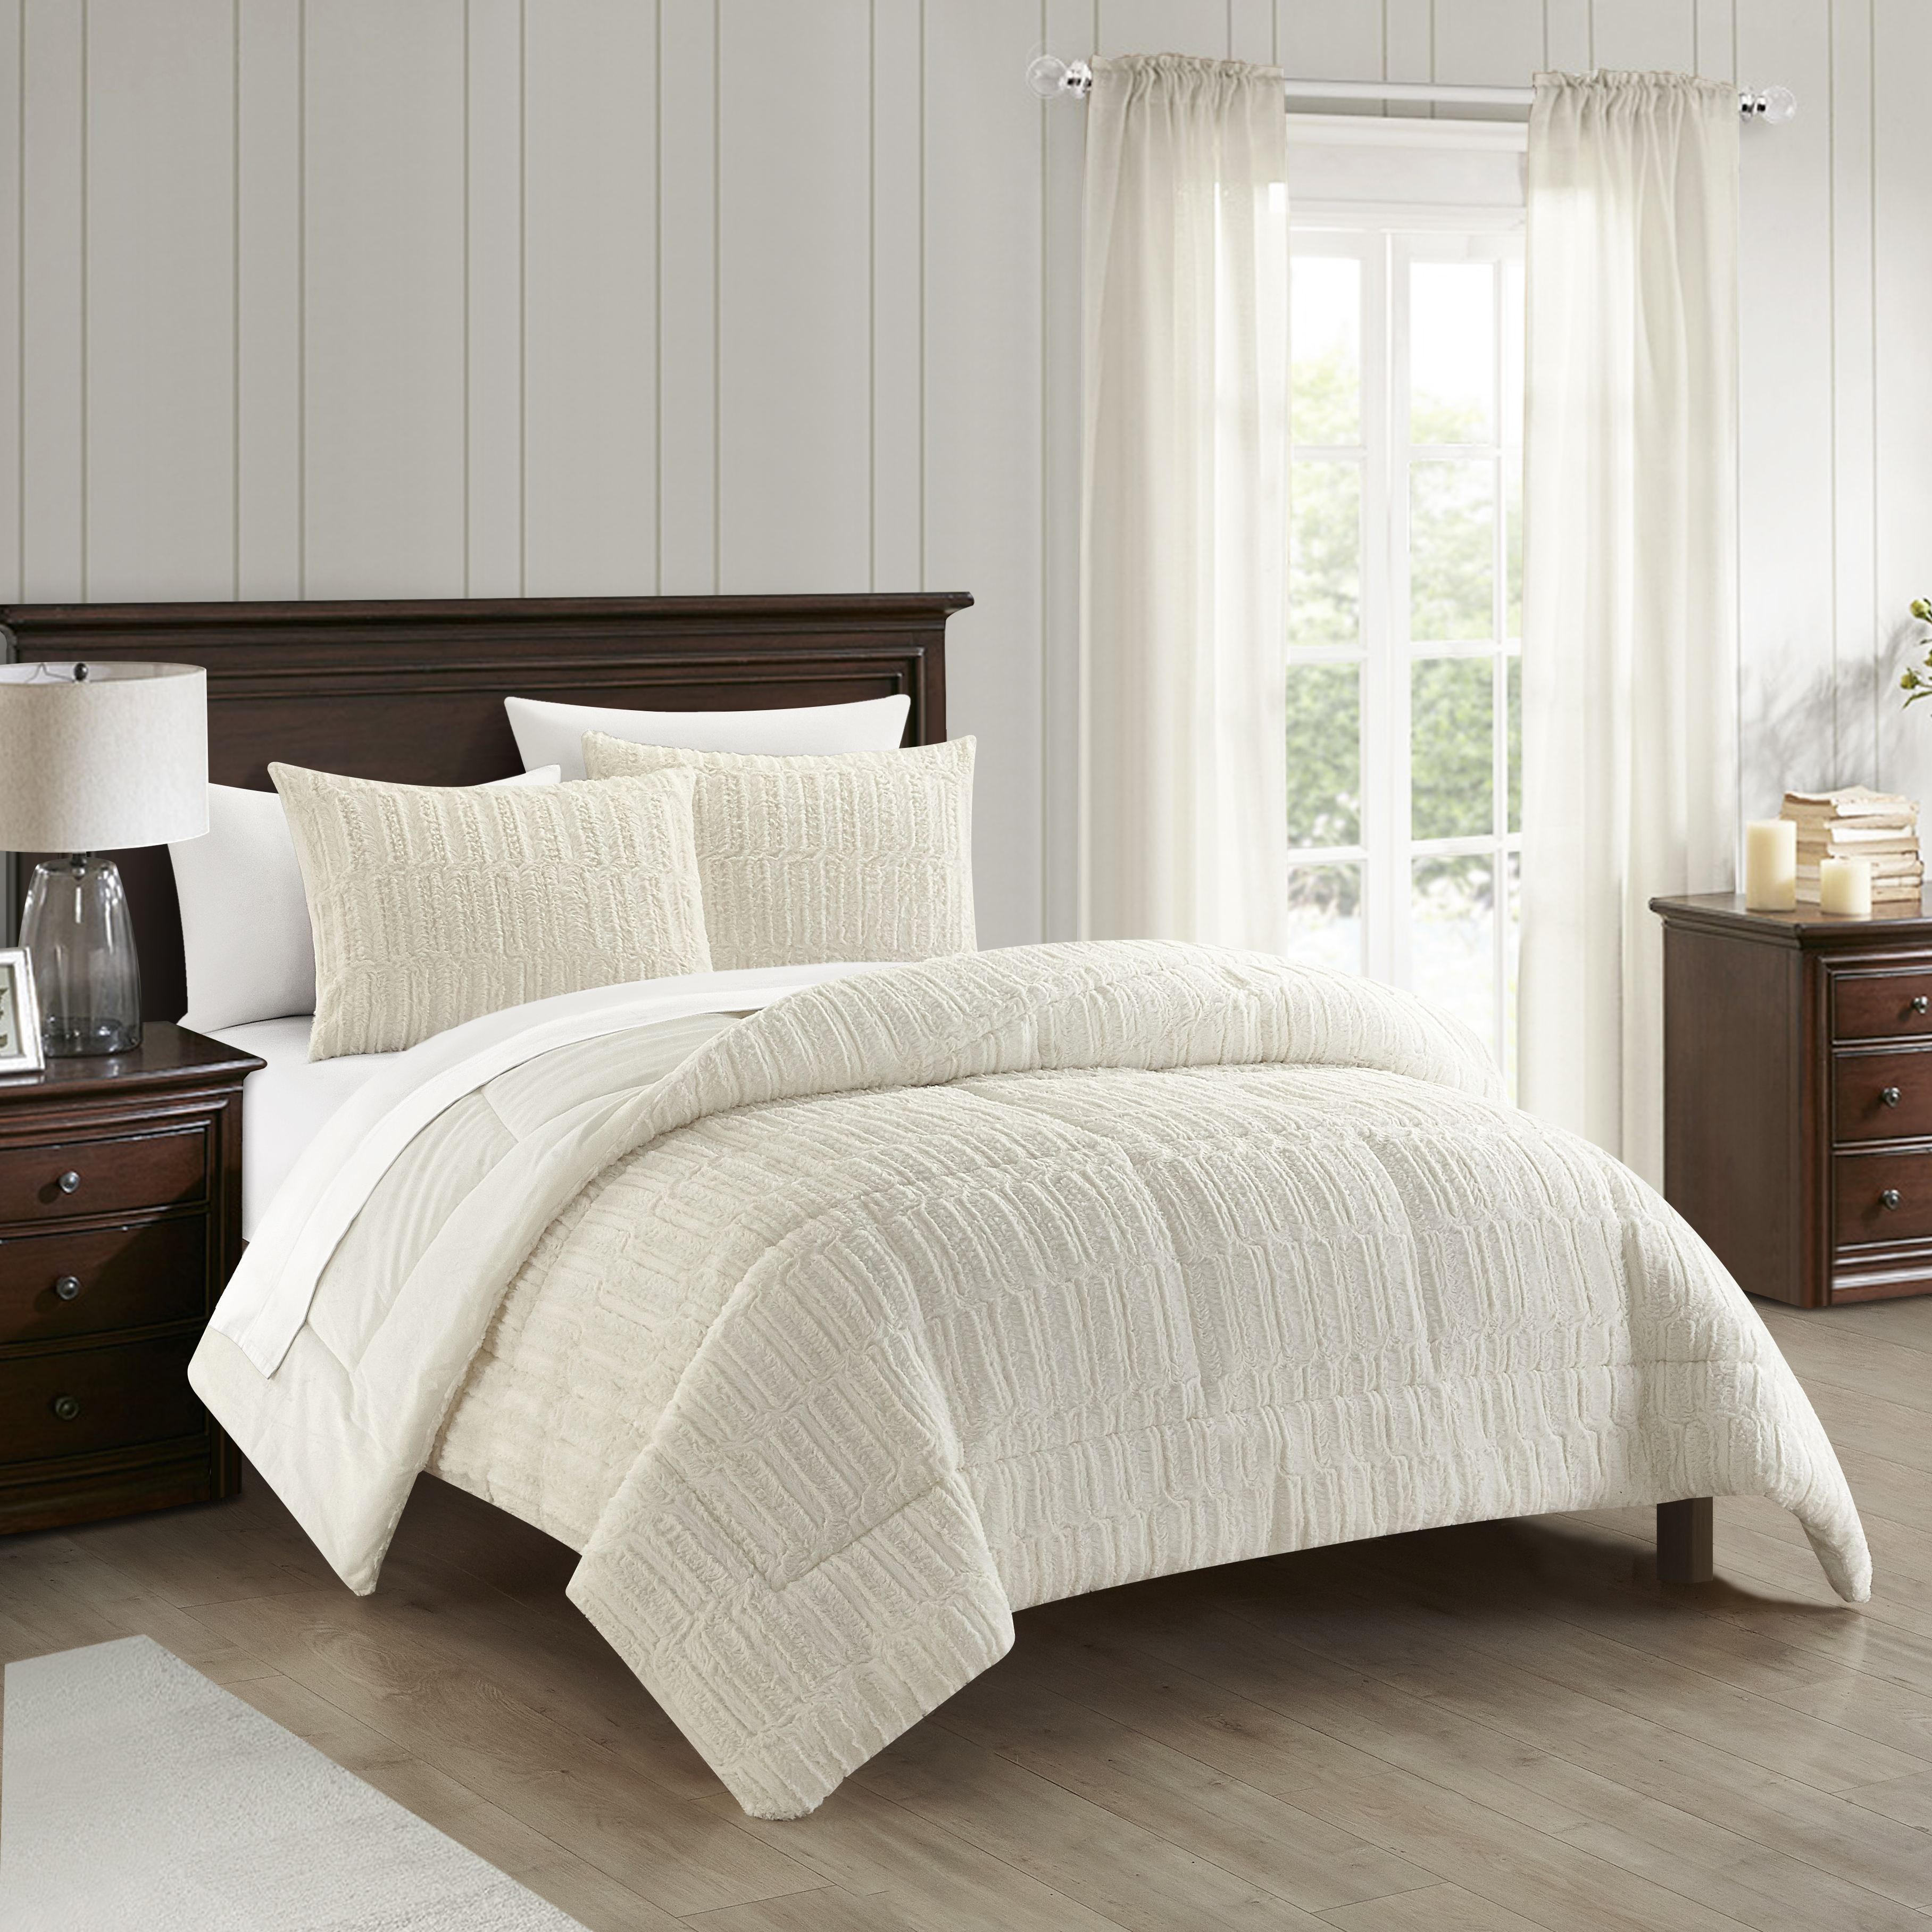 Farca 3 Or 2 Piece Comforter Textured Geometric Pattern Faux Micro-Mink Backing - Beige, Queen - 3 Piece